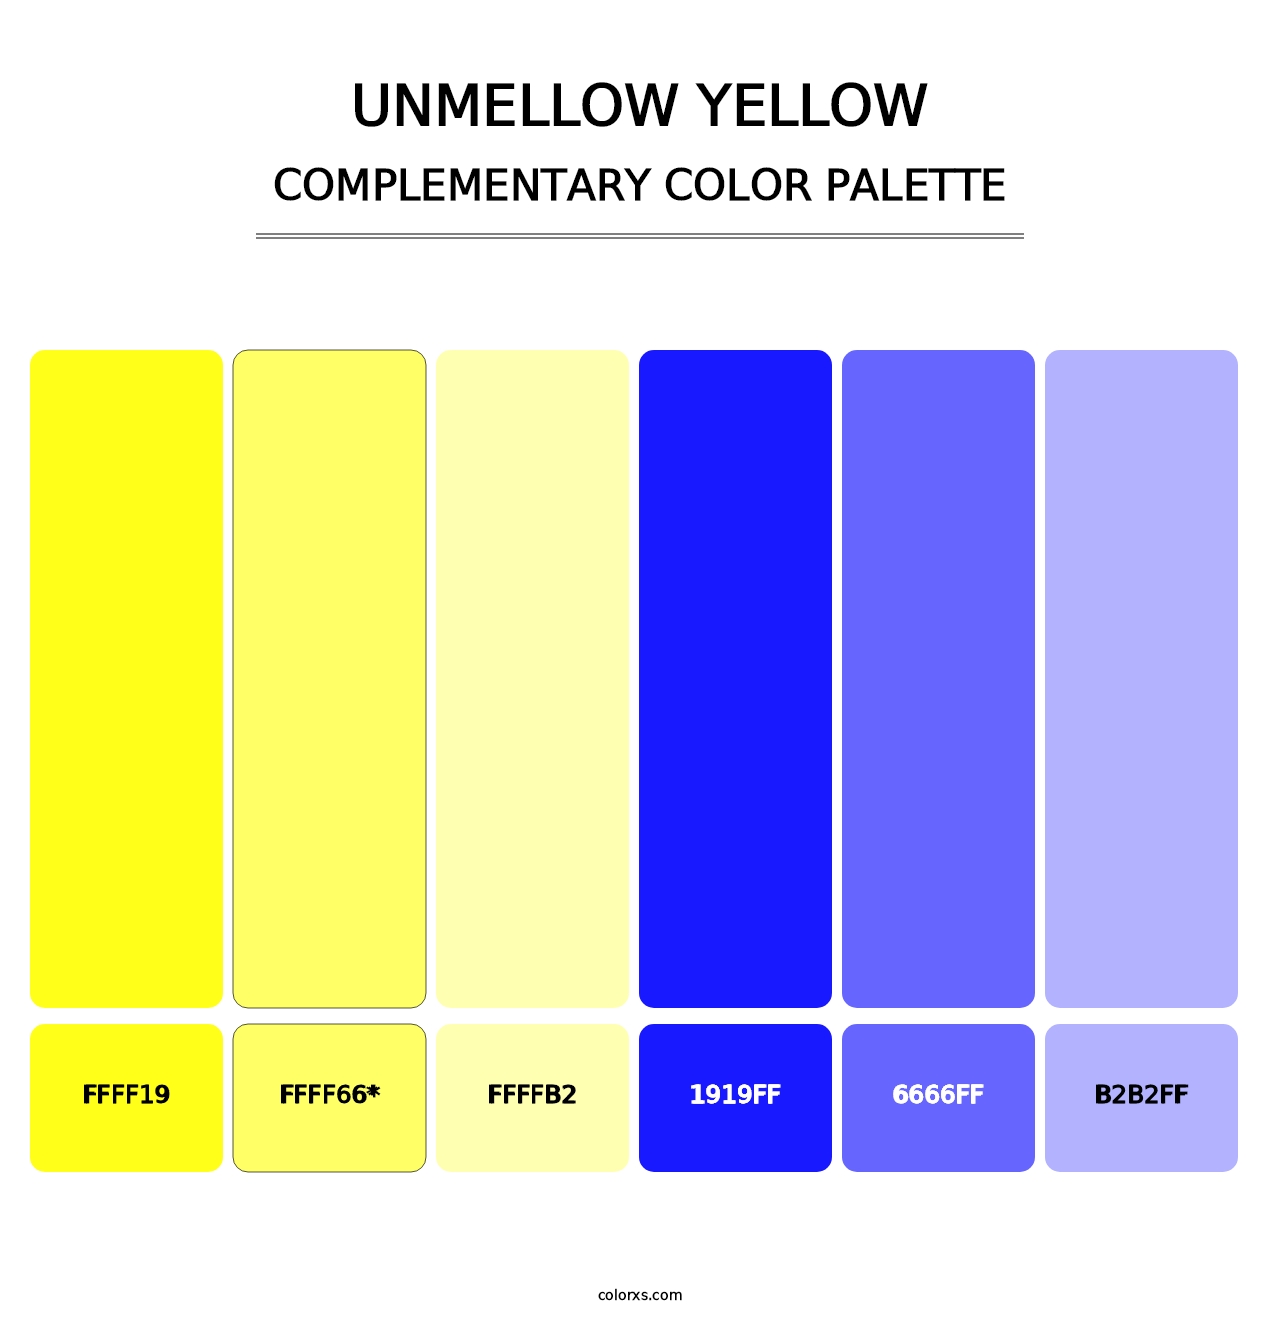 Unmellow Yellow - Complementary Color Palette